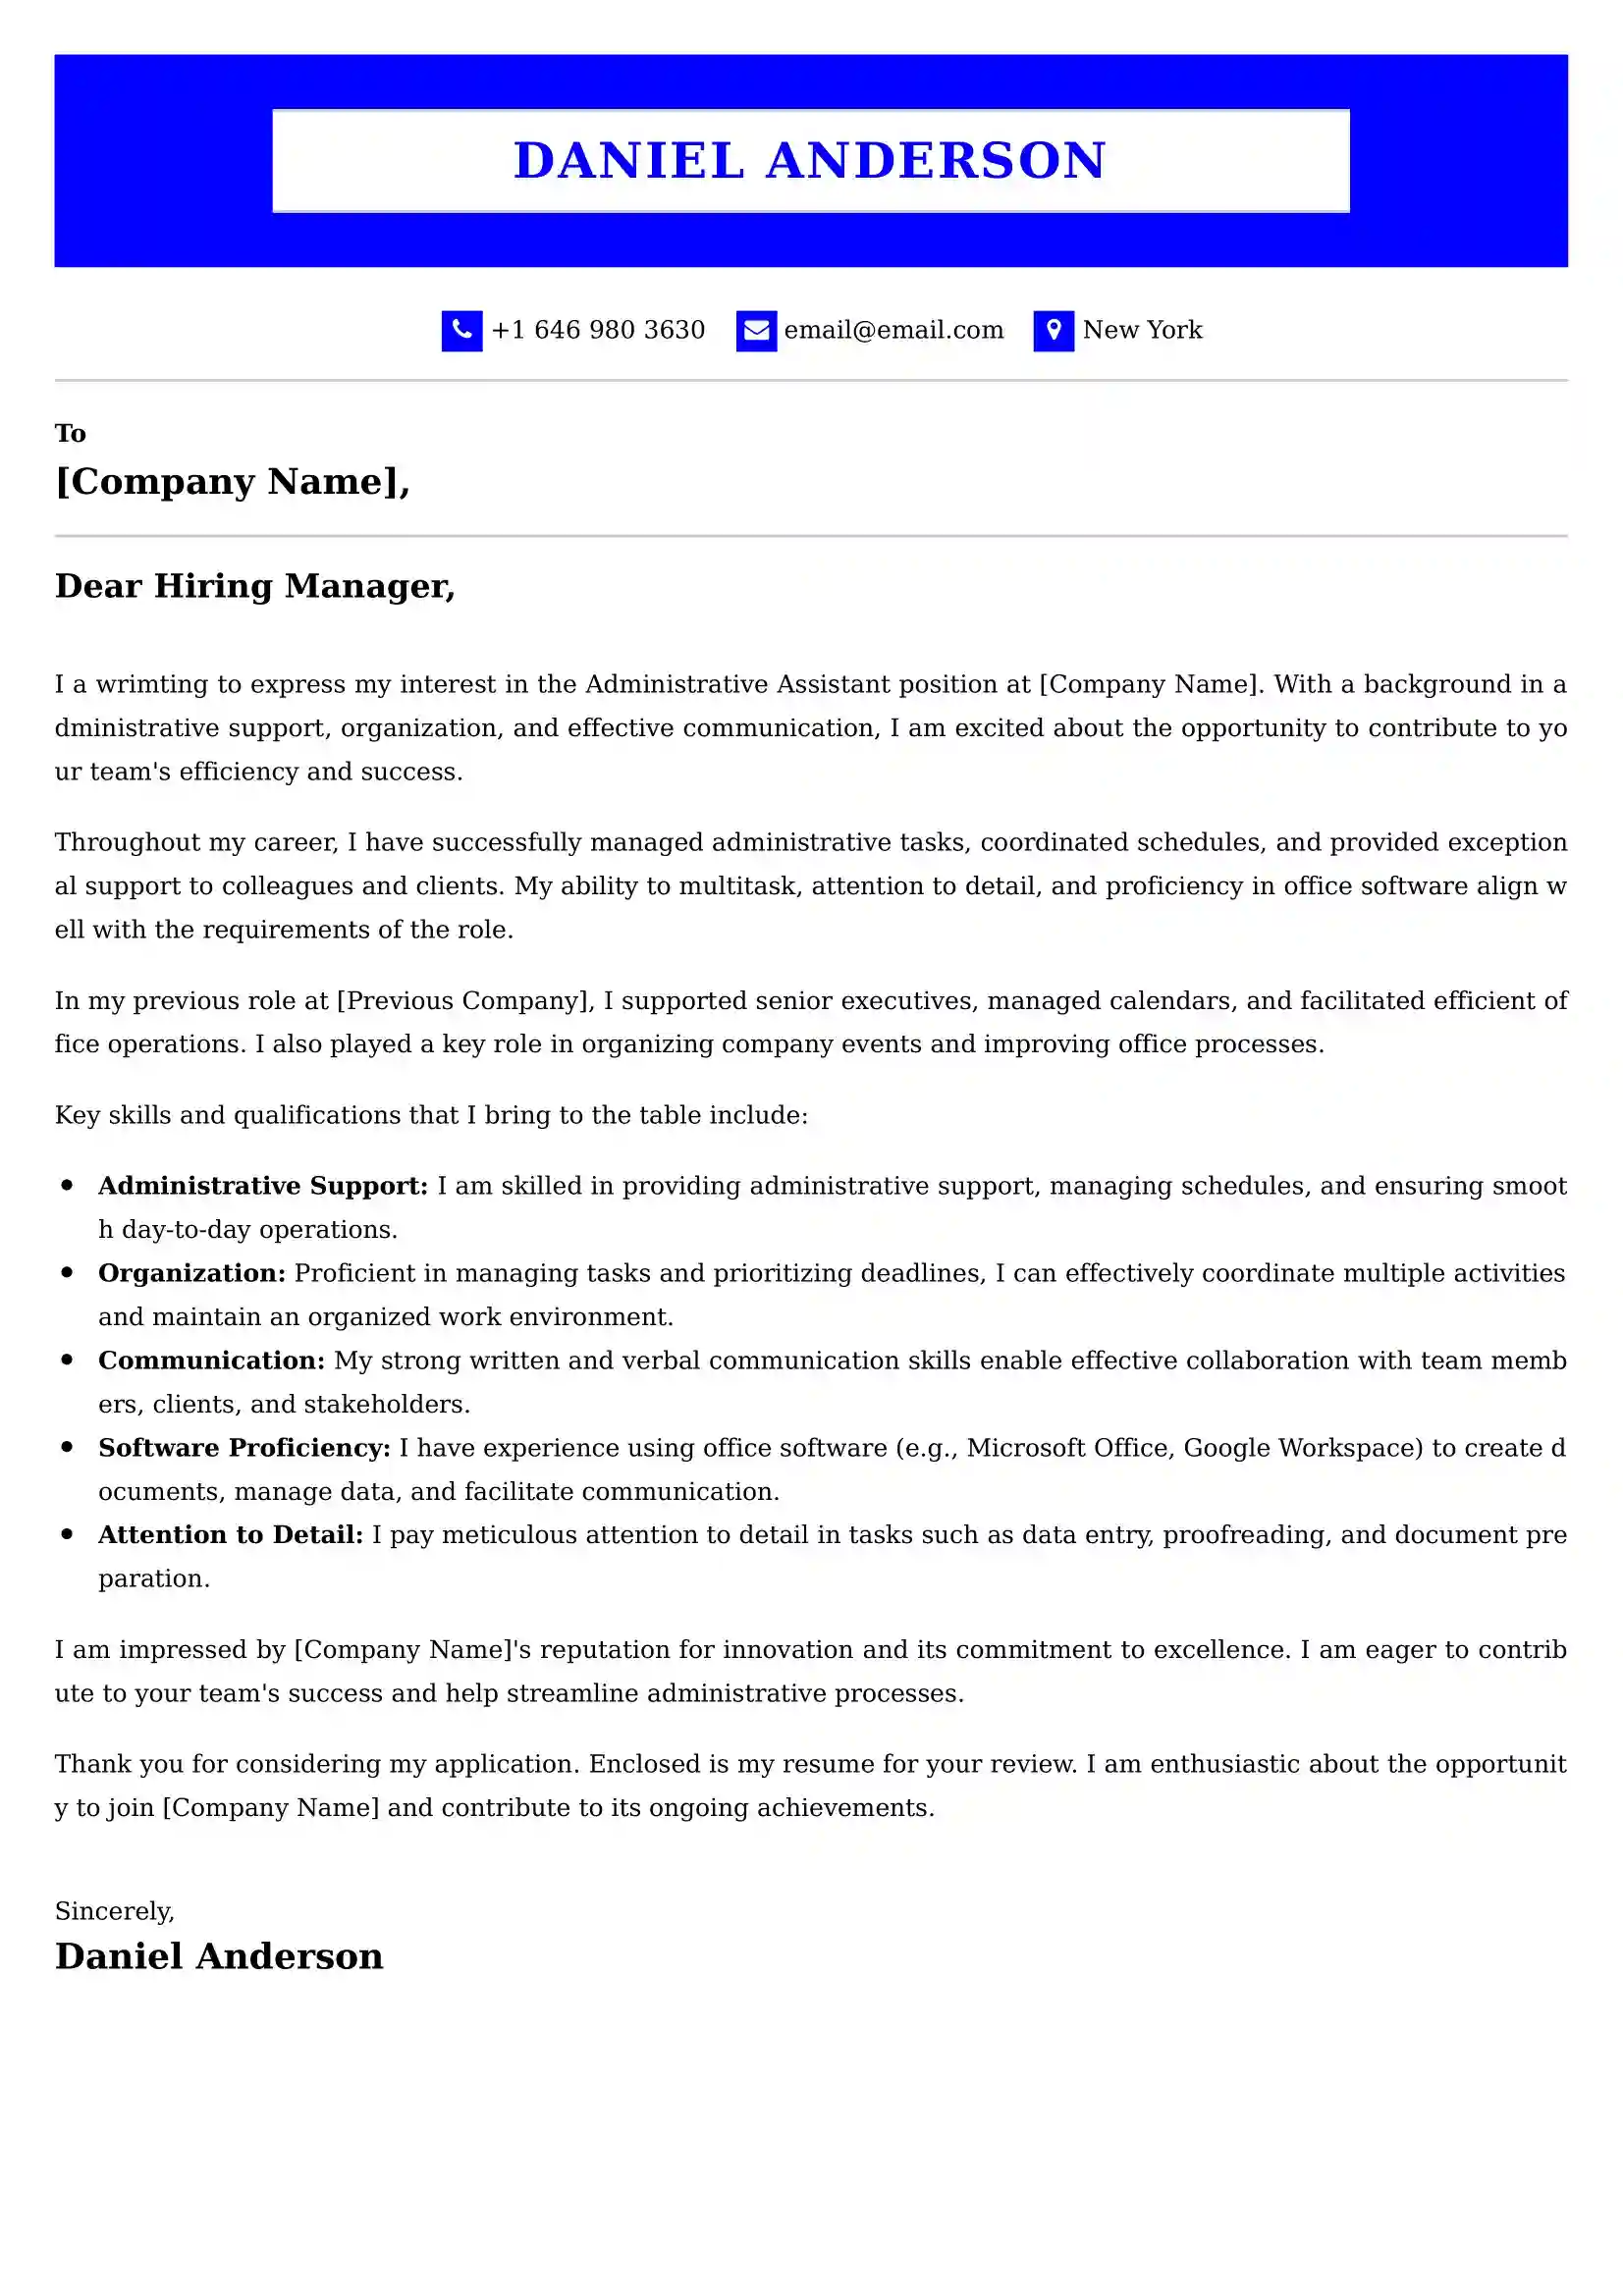 Administrative Assistant Cover Letter Examples - Latest UK Format